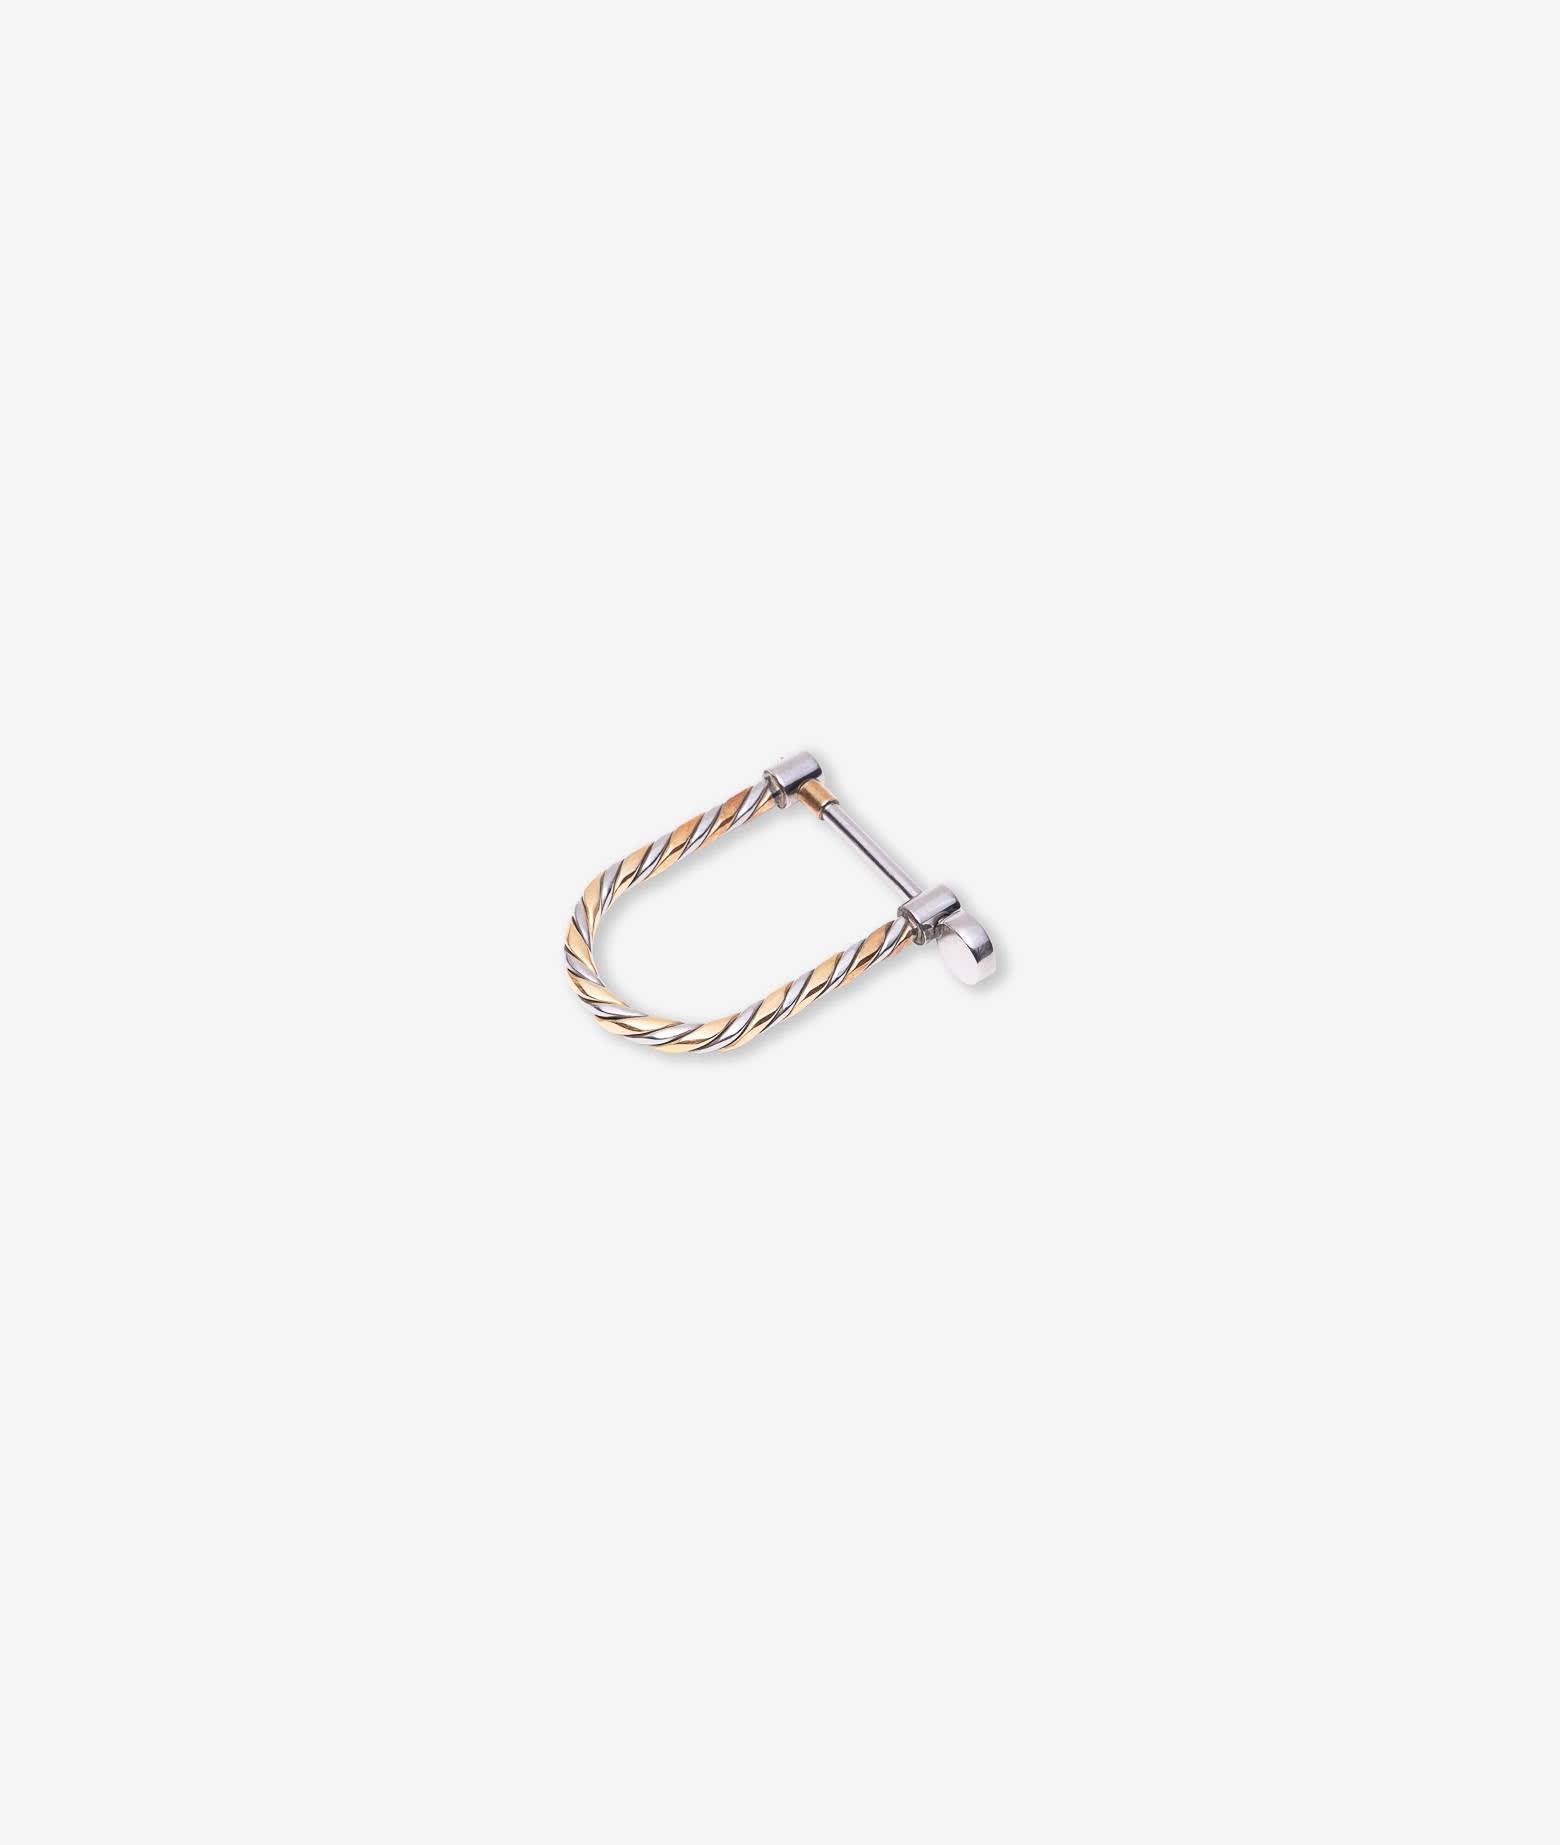 Larusmiani Stainless Steel And Yellow Gold Shackle Shaped Key Holder Keyring In Neutral